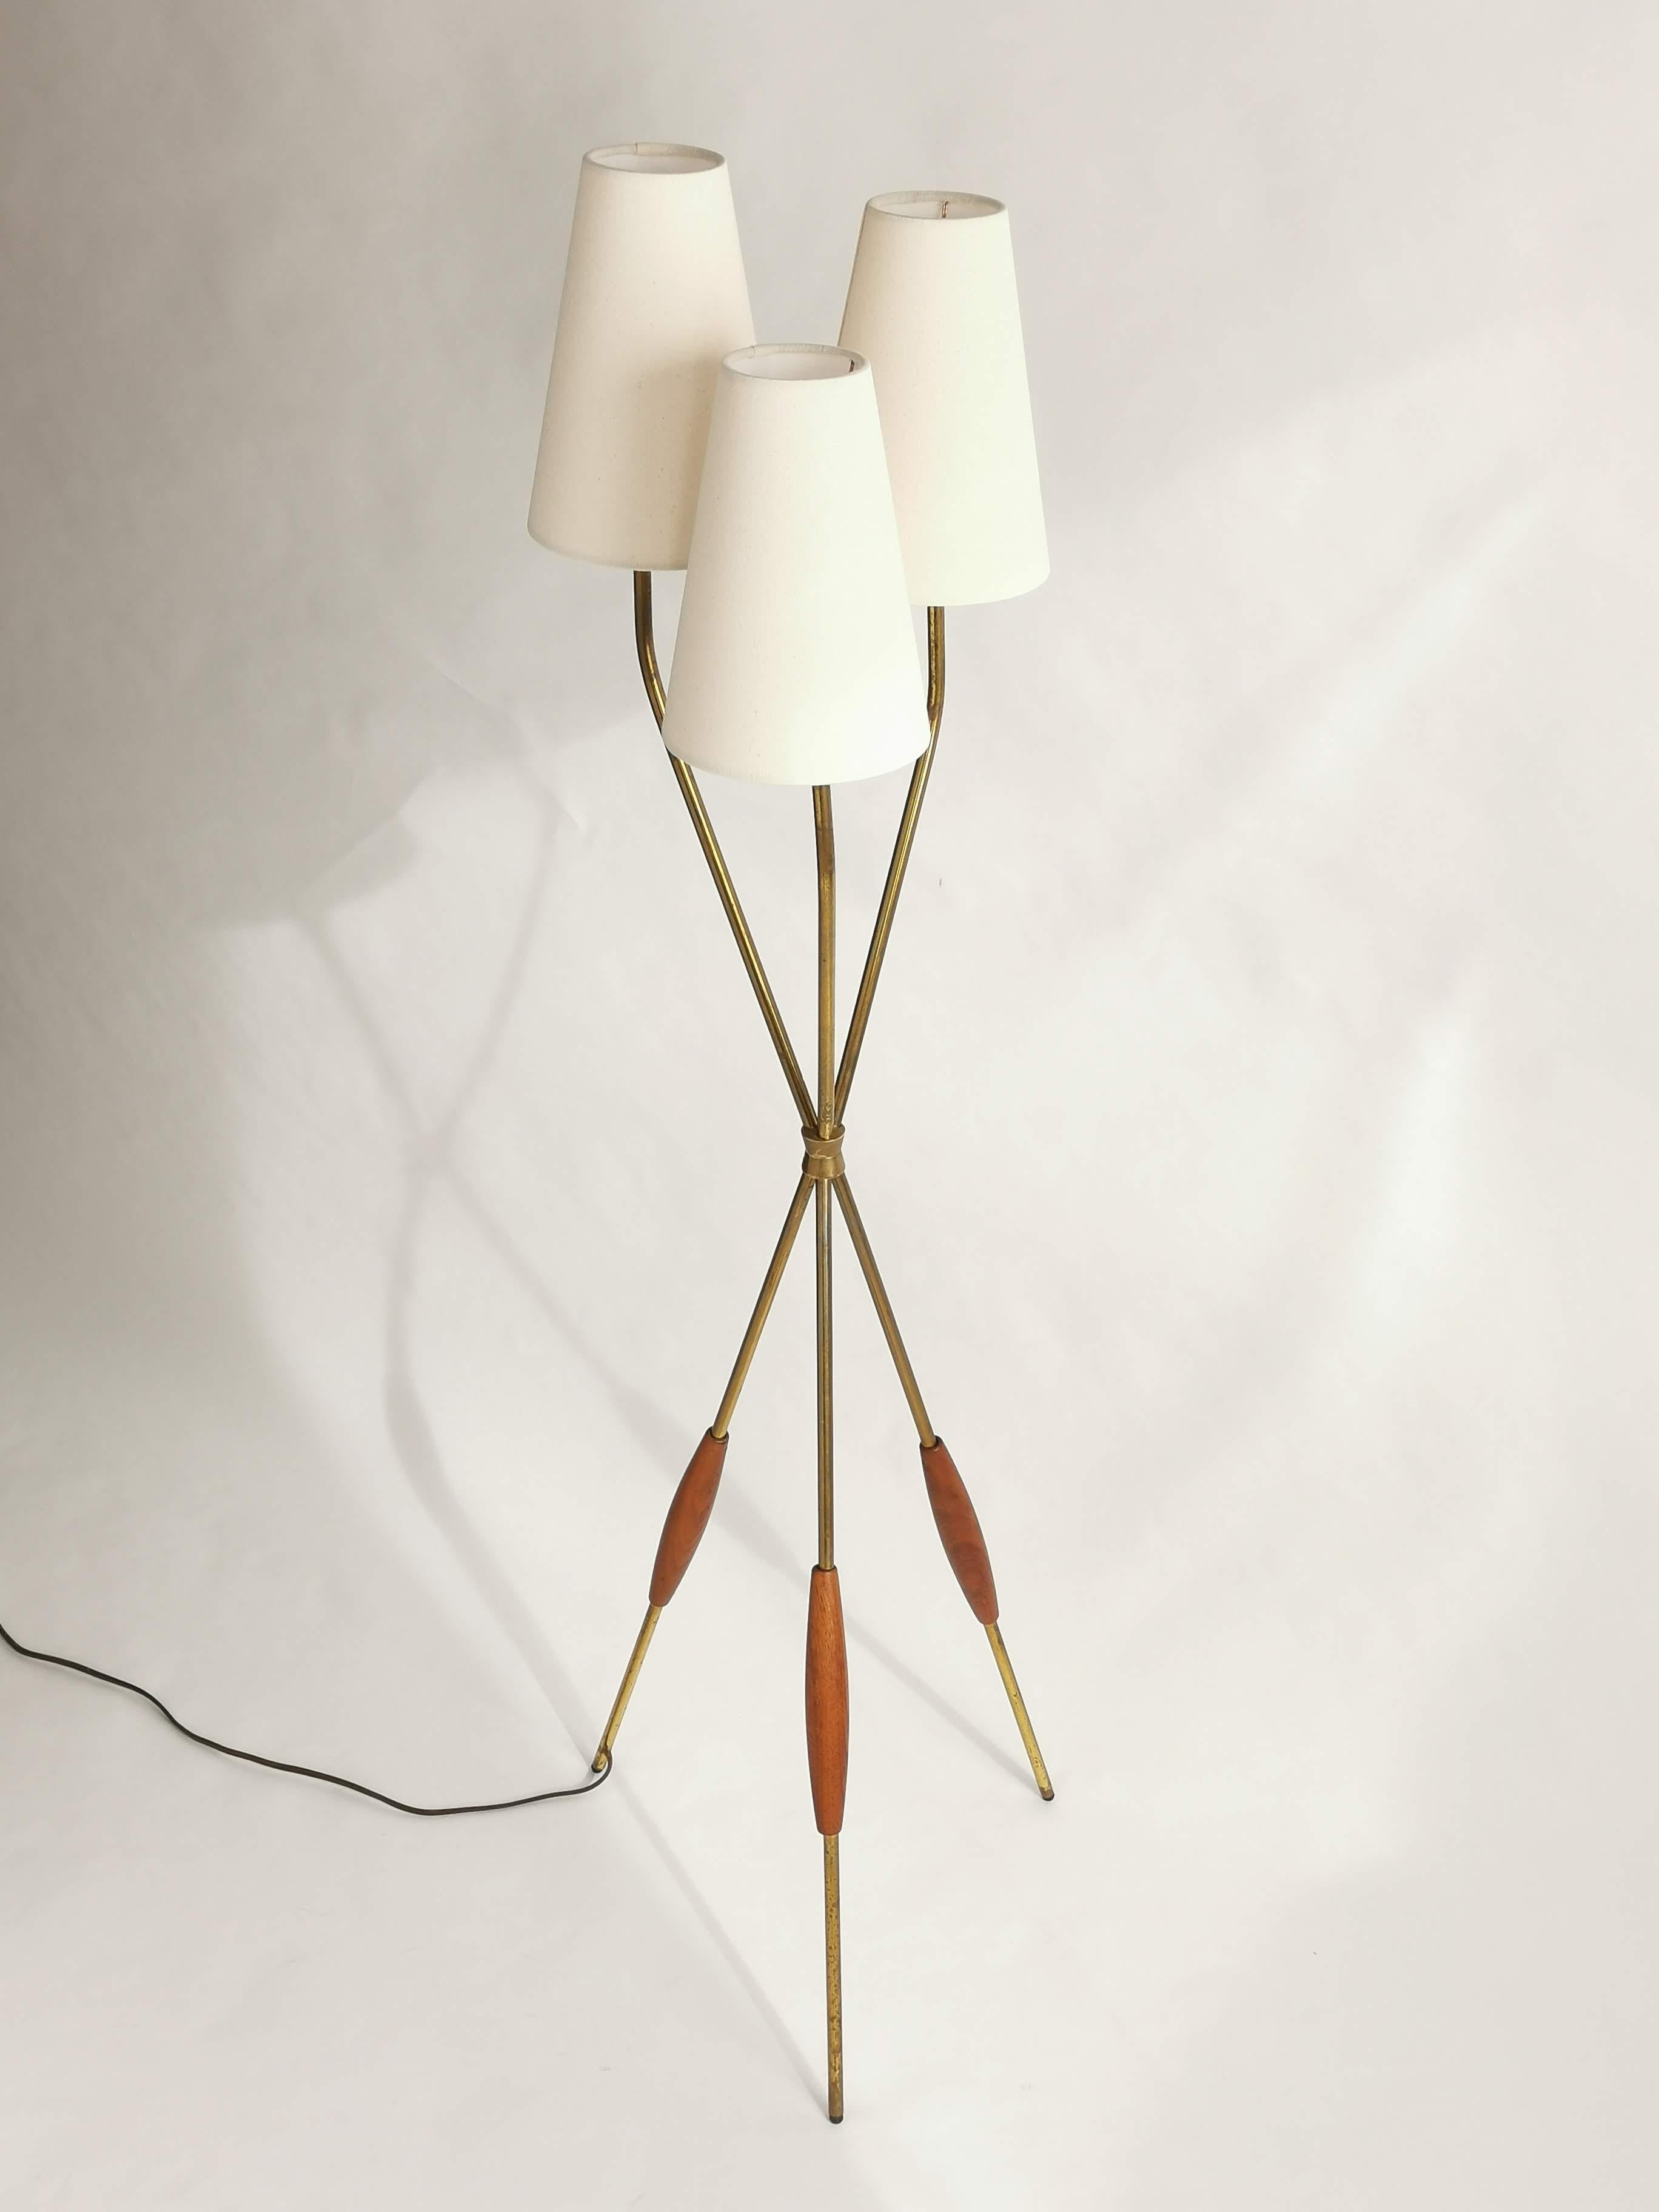 Iconic tripod floor lamp from Gerald Thurston for Lightolier.

Three new shade in an off-white tone supplied with order. 

Each shade measure 10 in. high, 7 in. wide on base and 4 in. wide on top. 

Contain three regular E26 size socket rated